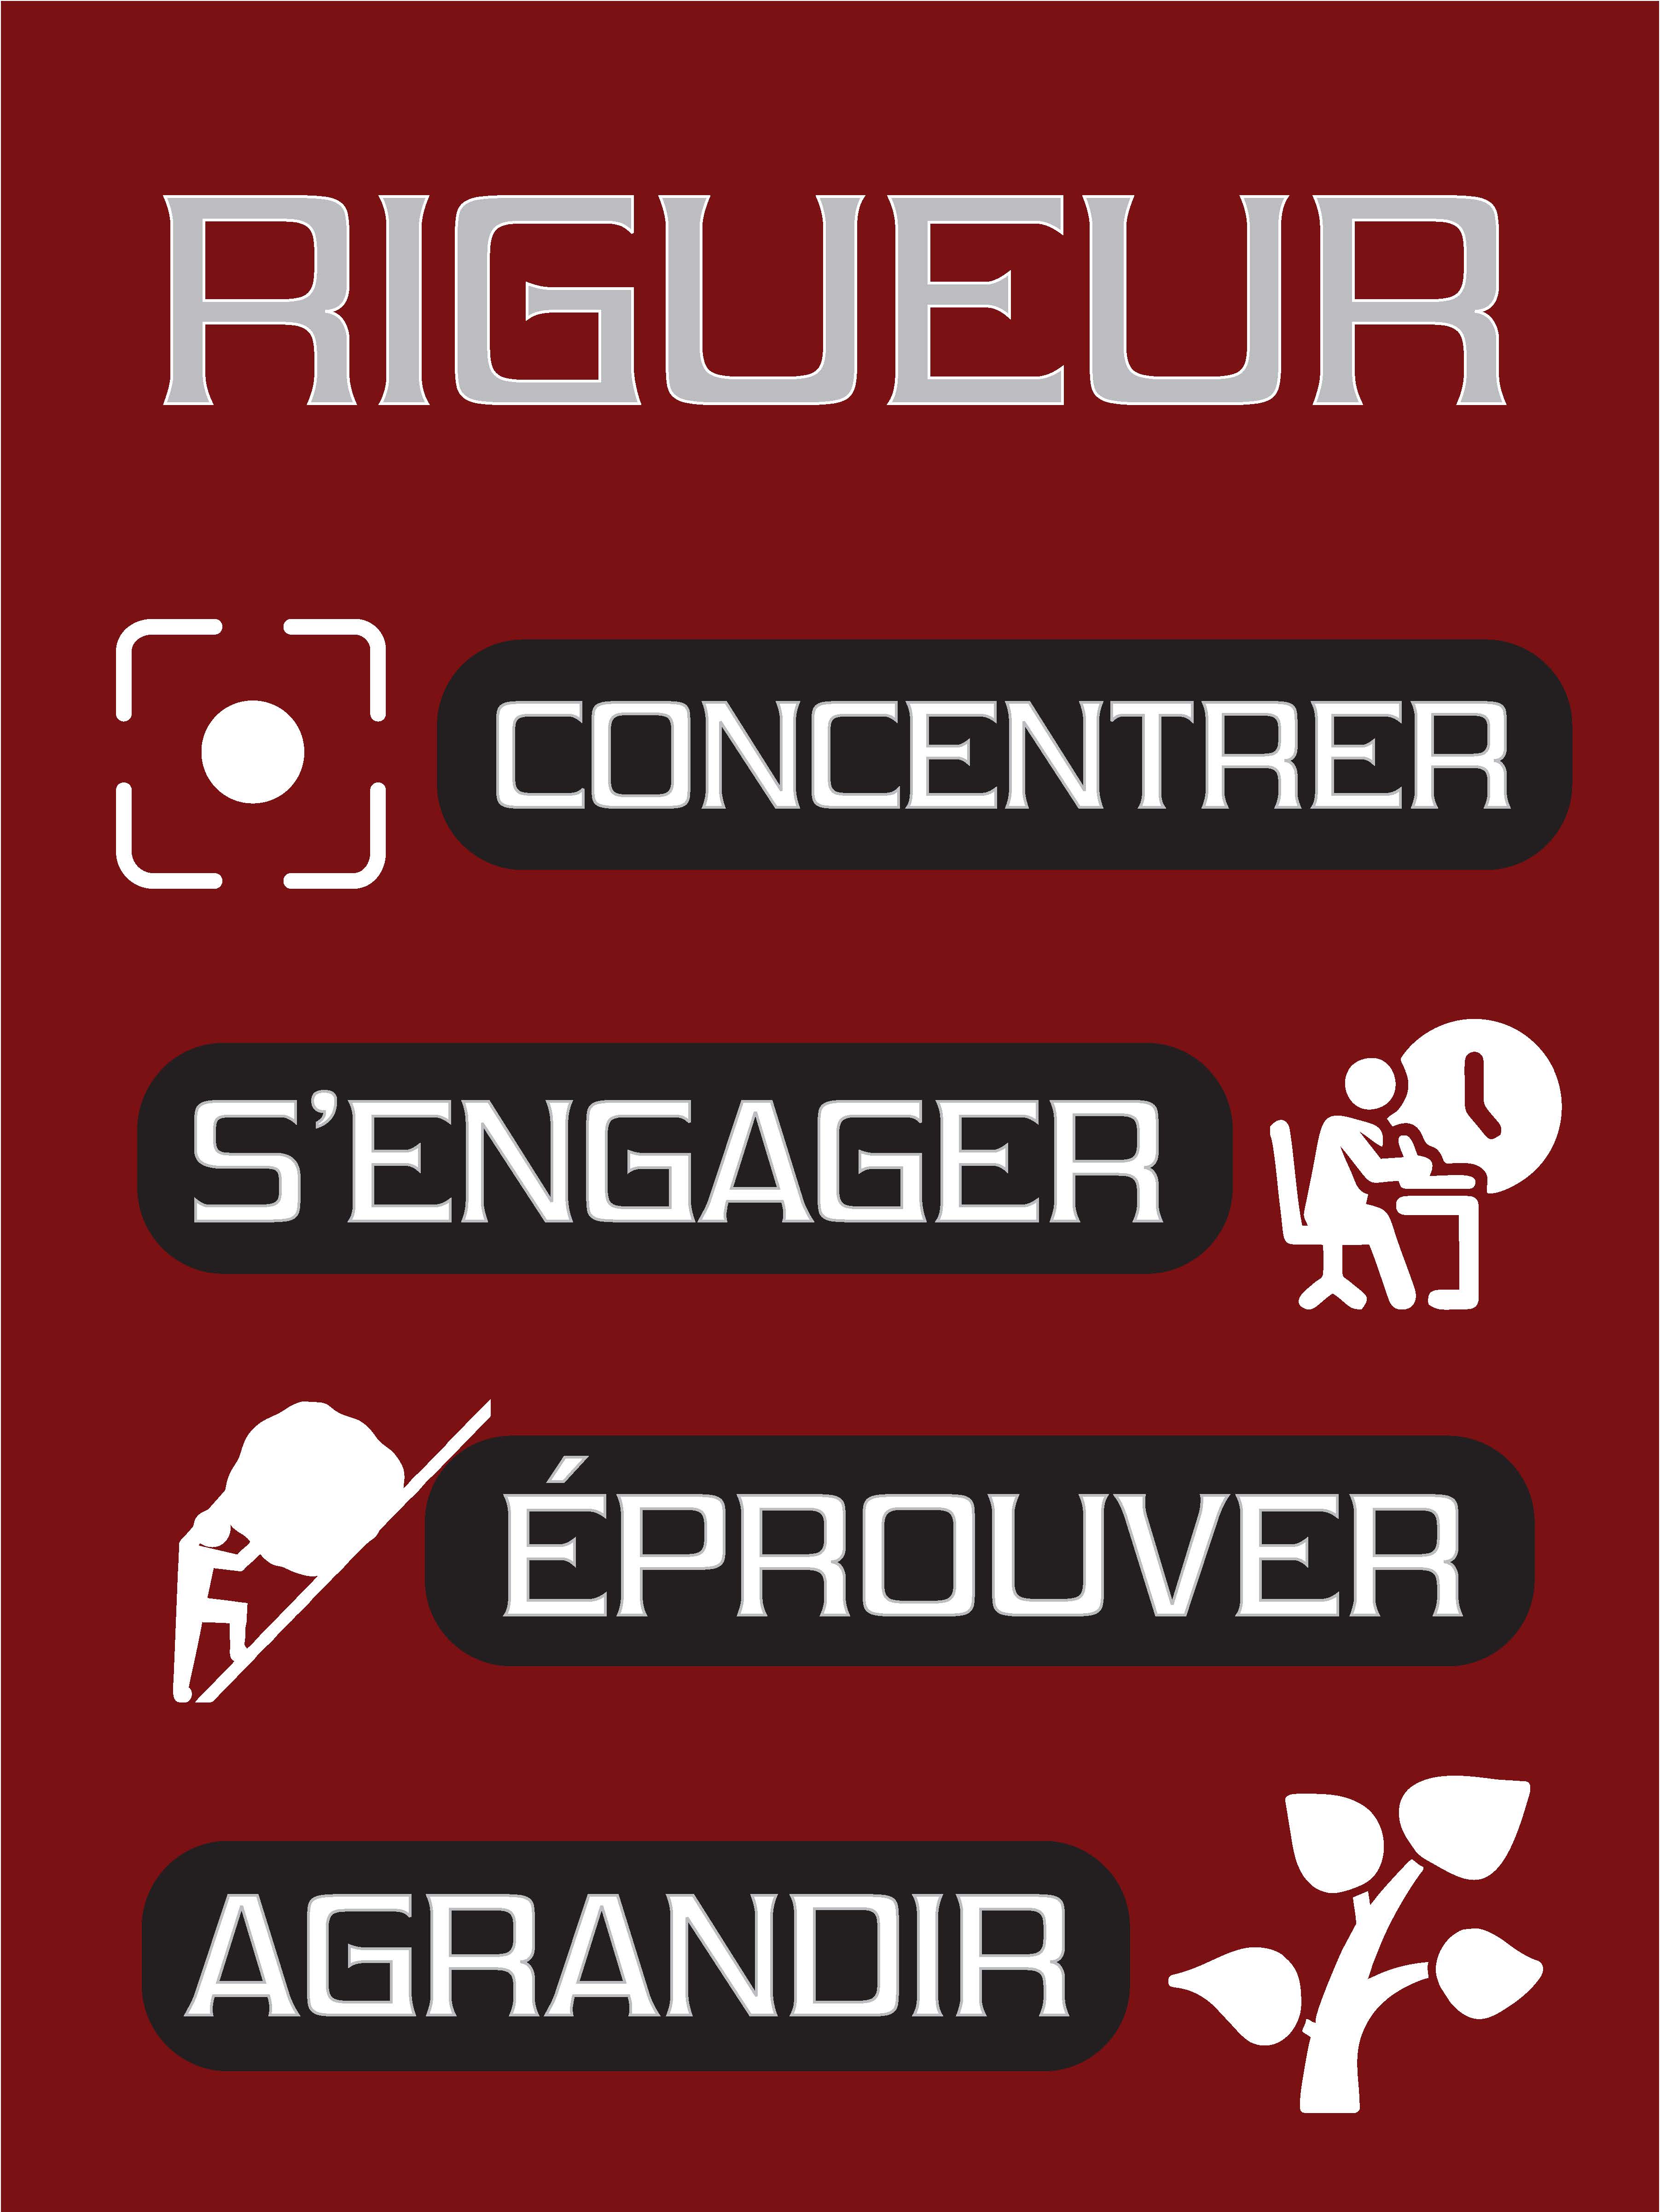 French rigeur poster.jpg